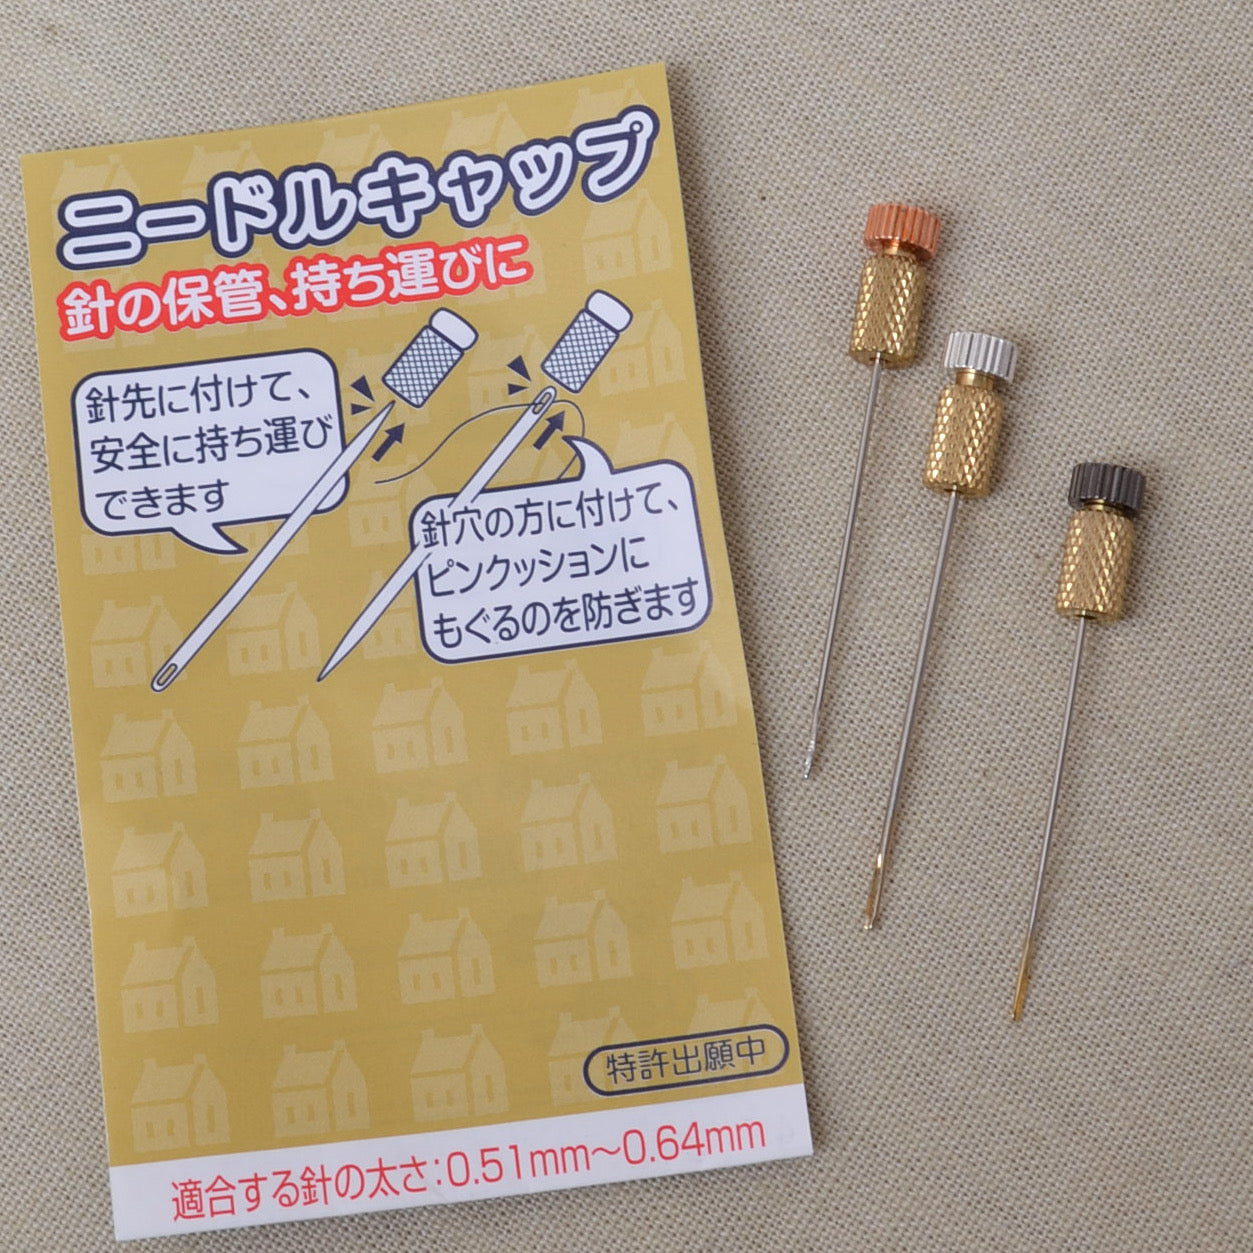 3 metal needle caps from Little House, Japan